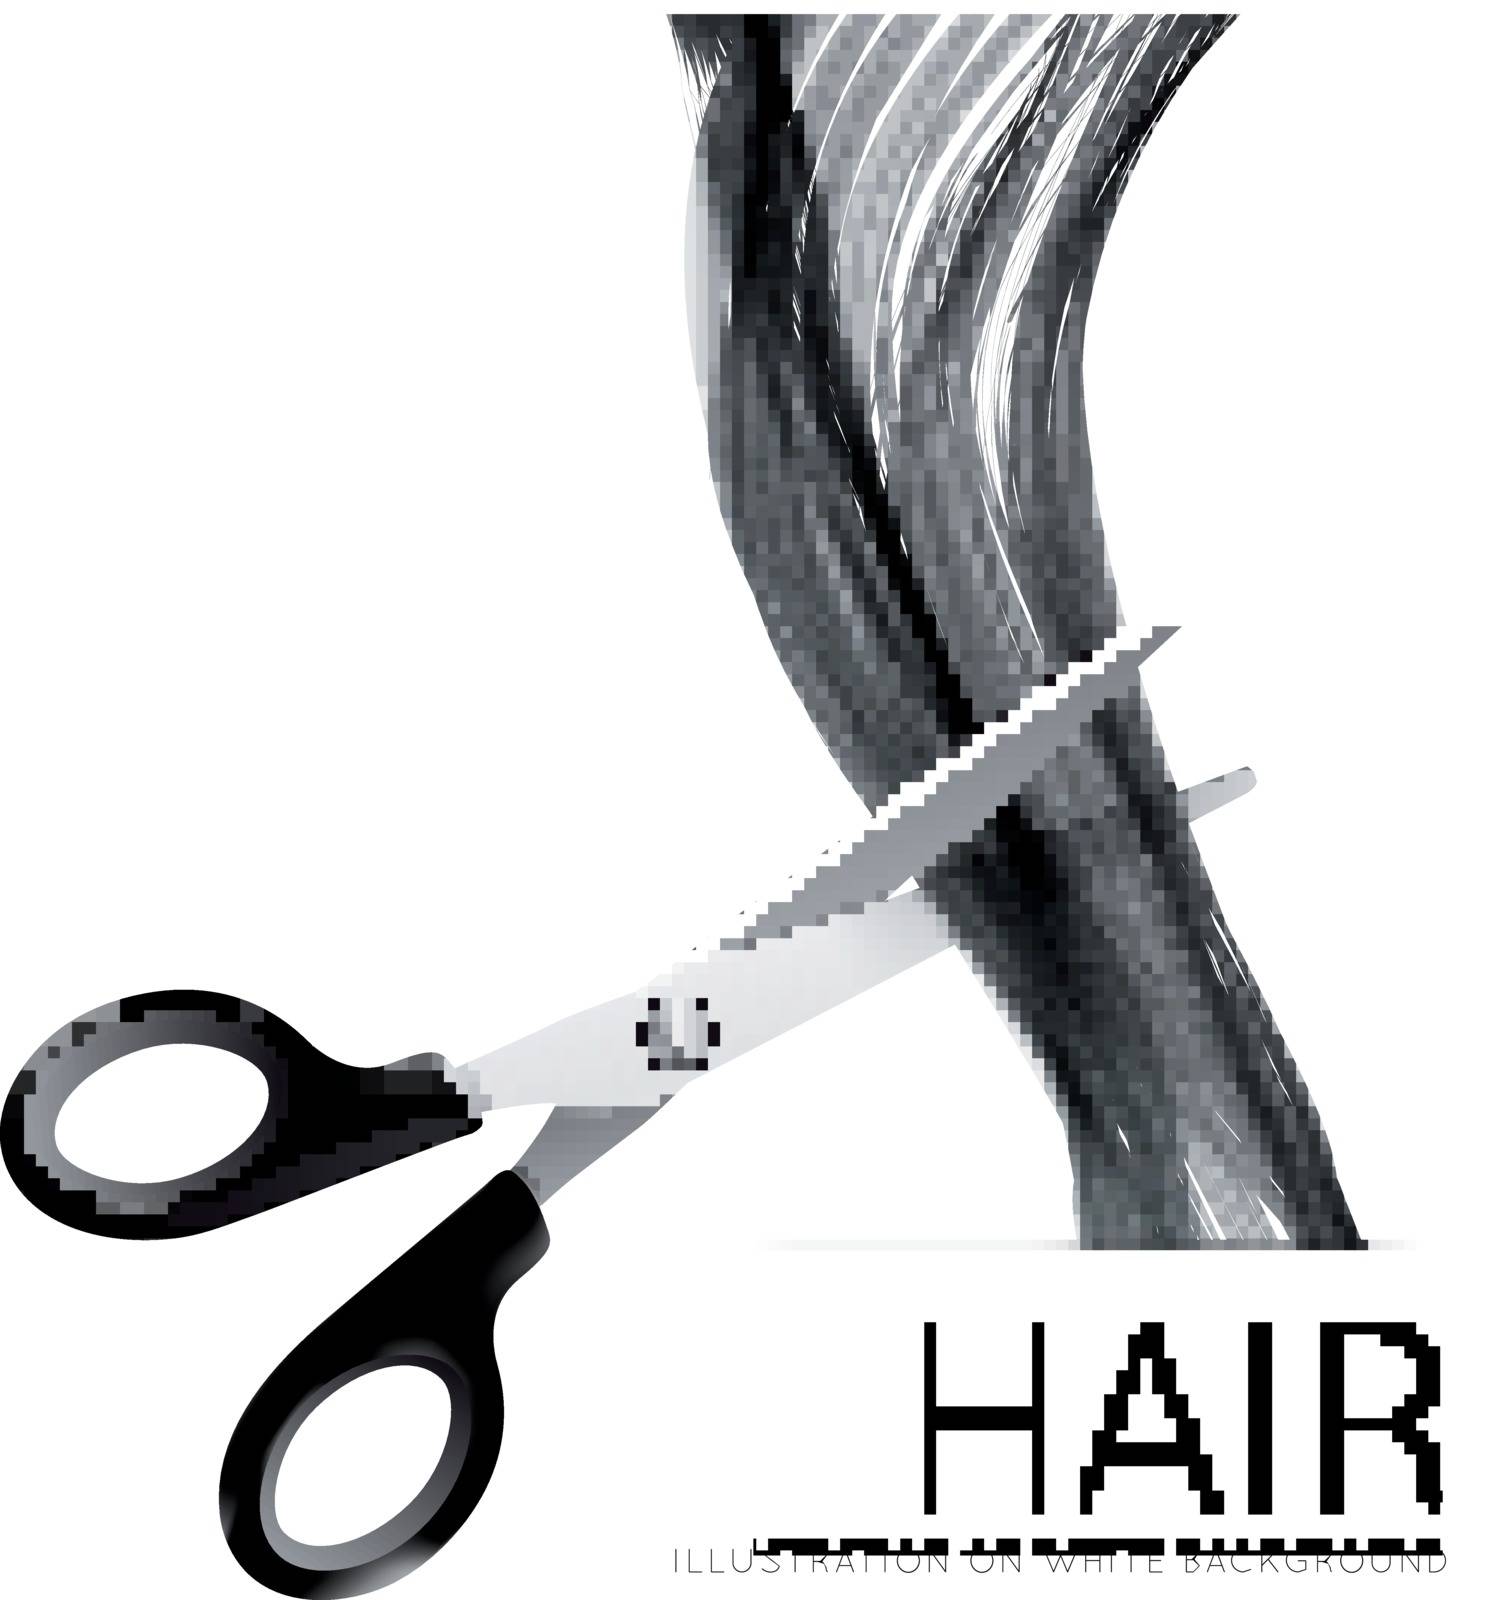 Hair and scissors on a white background. Vector illustration